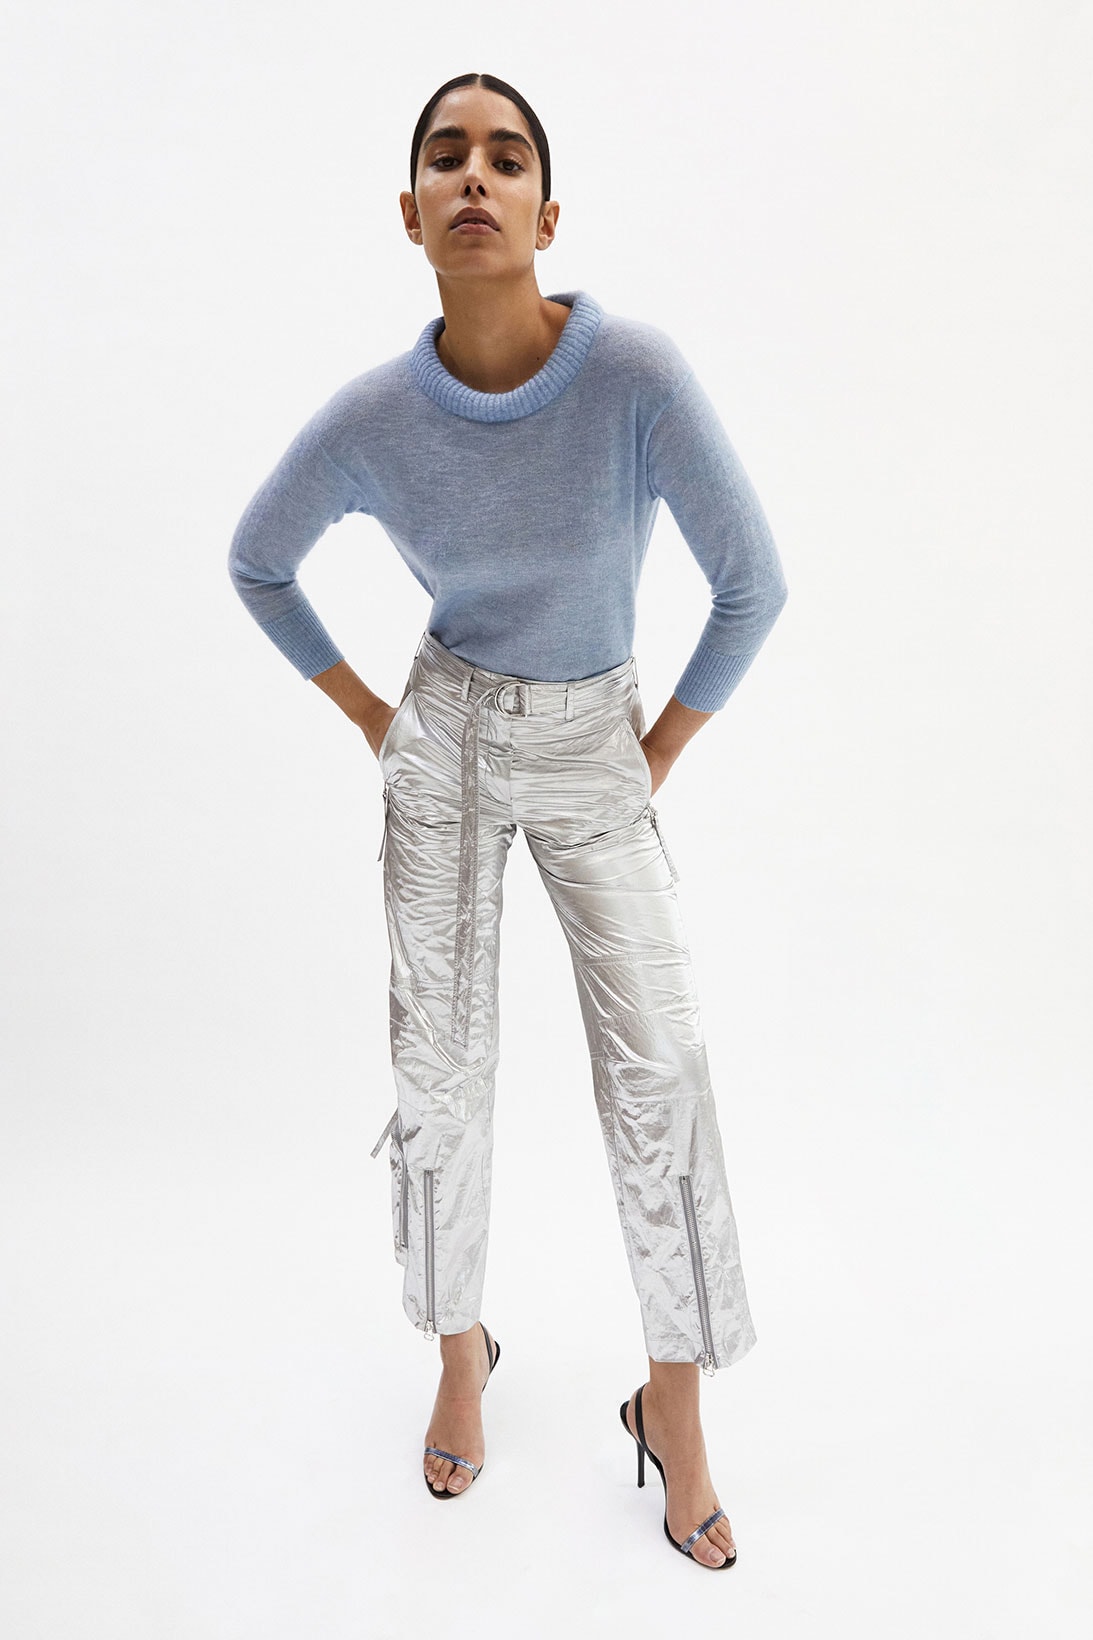 helmut lang fall winter 2021 fw21 collection lookbook sweater metallic pants silver